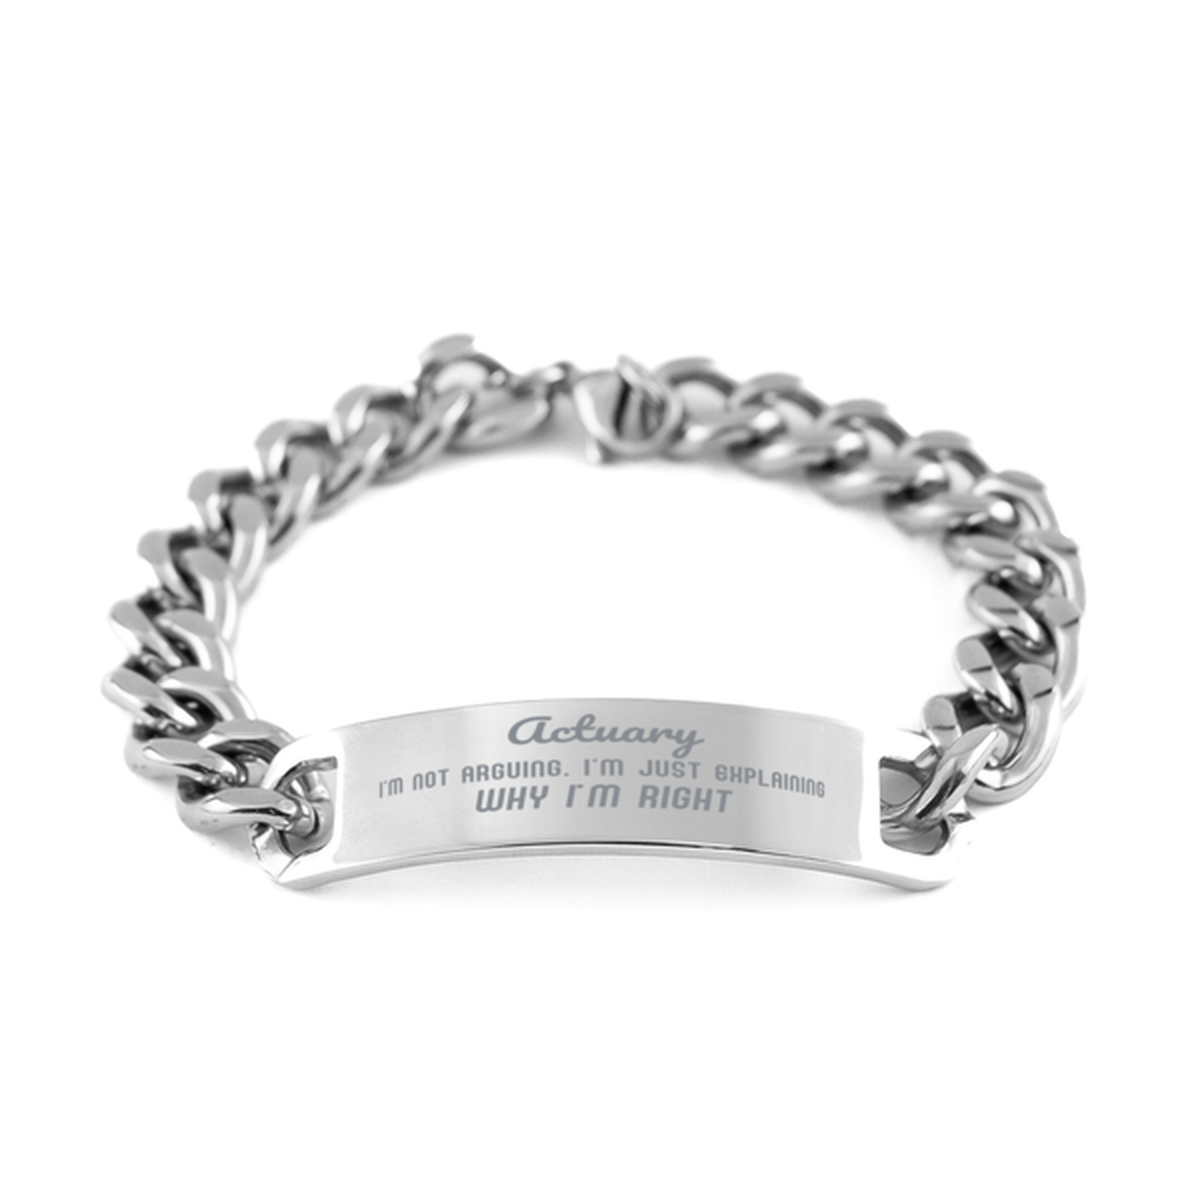 Actuary I'm not Arguing. I'm Just Explaining Why I'm RIGHT Cuban Chain Stainless Steel Bracelet, Graduation Birthday Christmas Actuary Gifts For Actuary Funny Saying Quote Present for Men Women Coworker